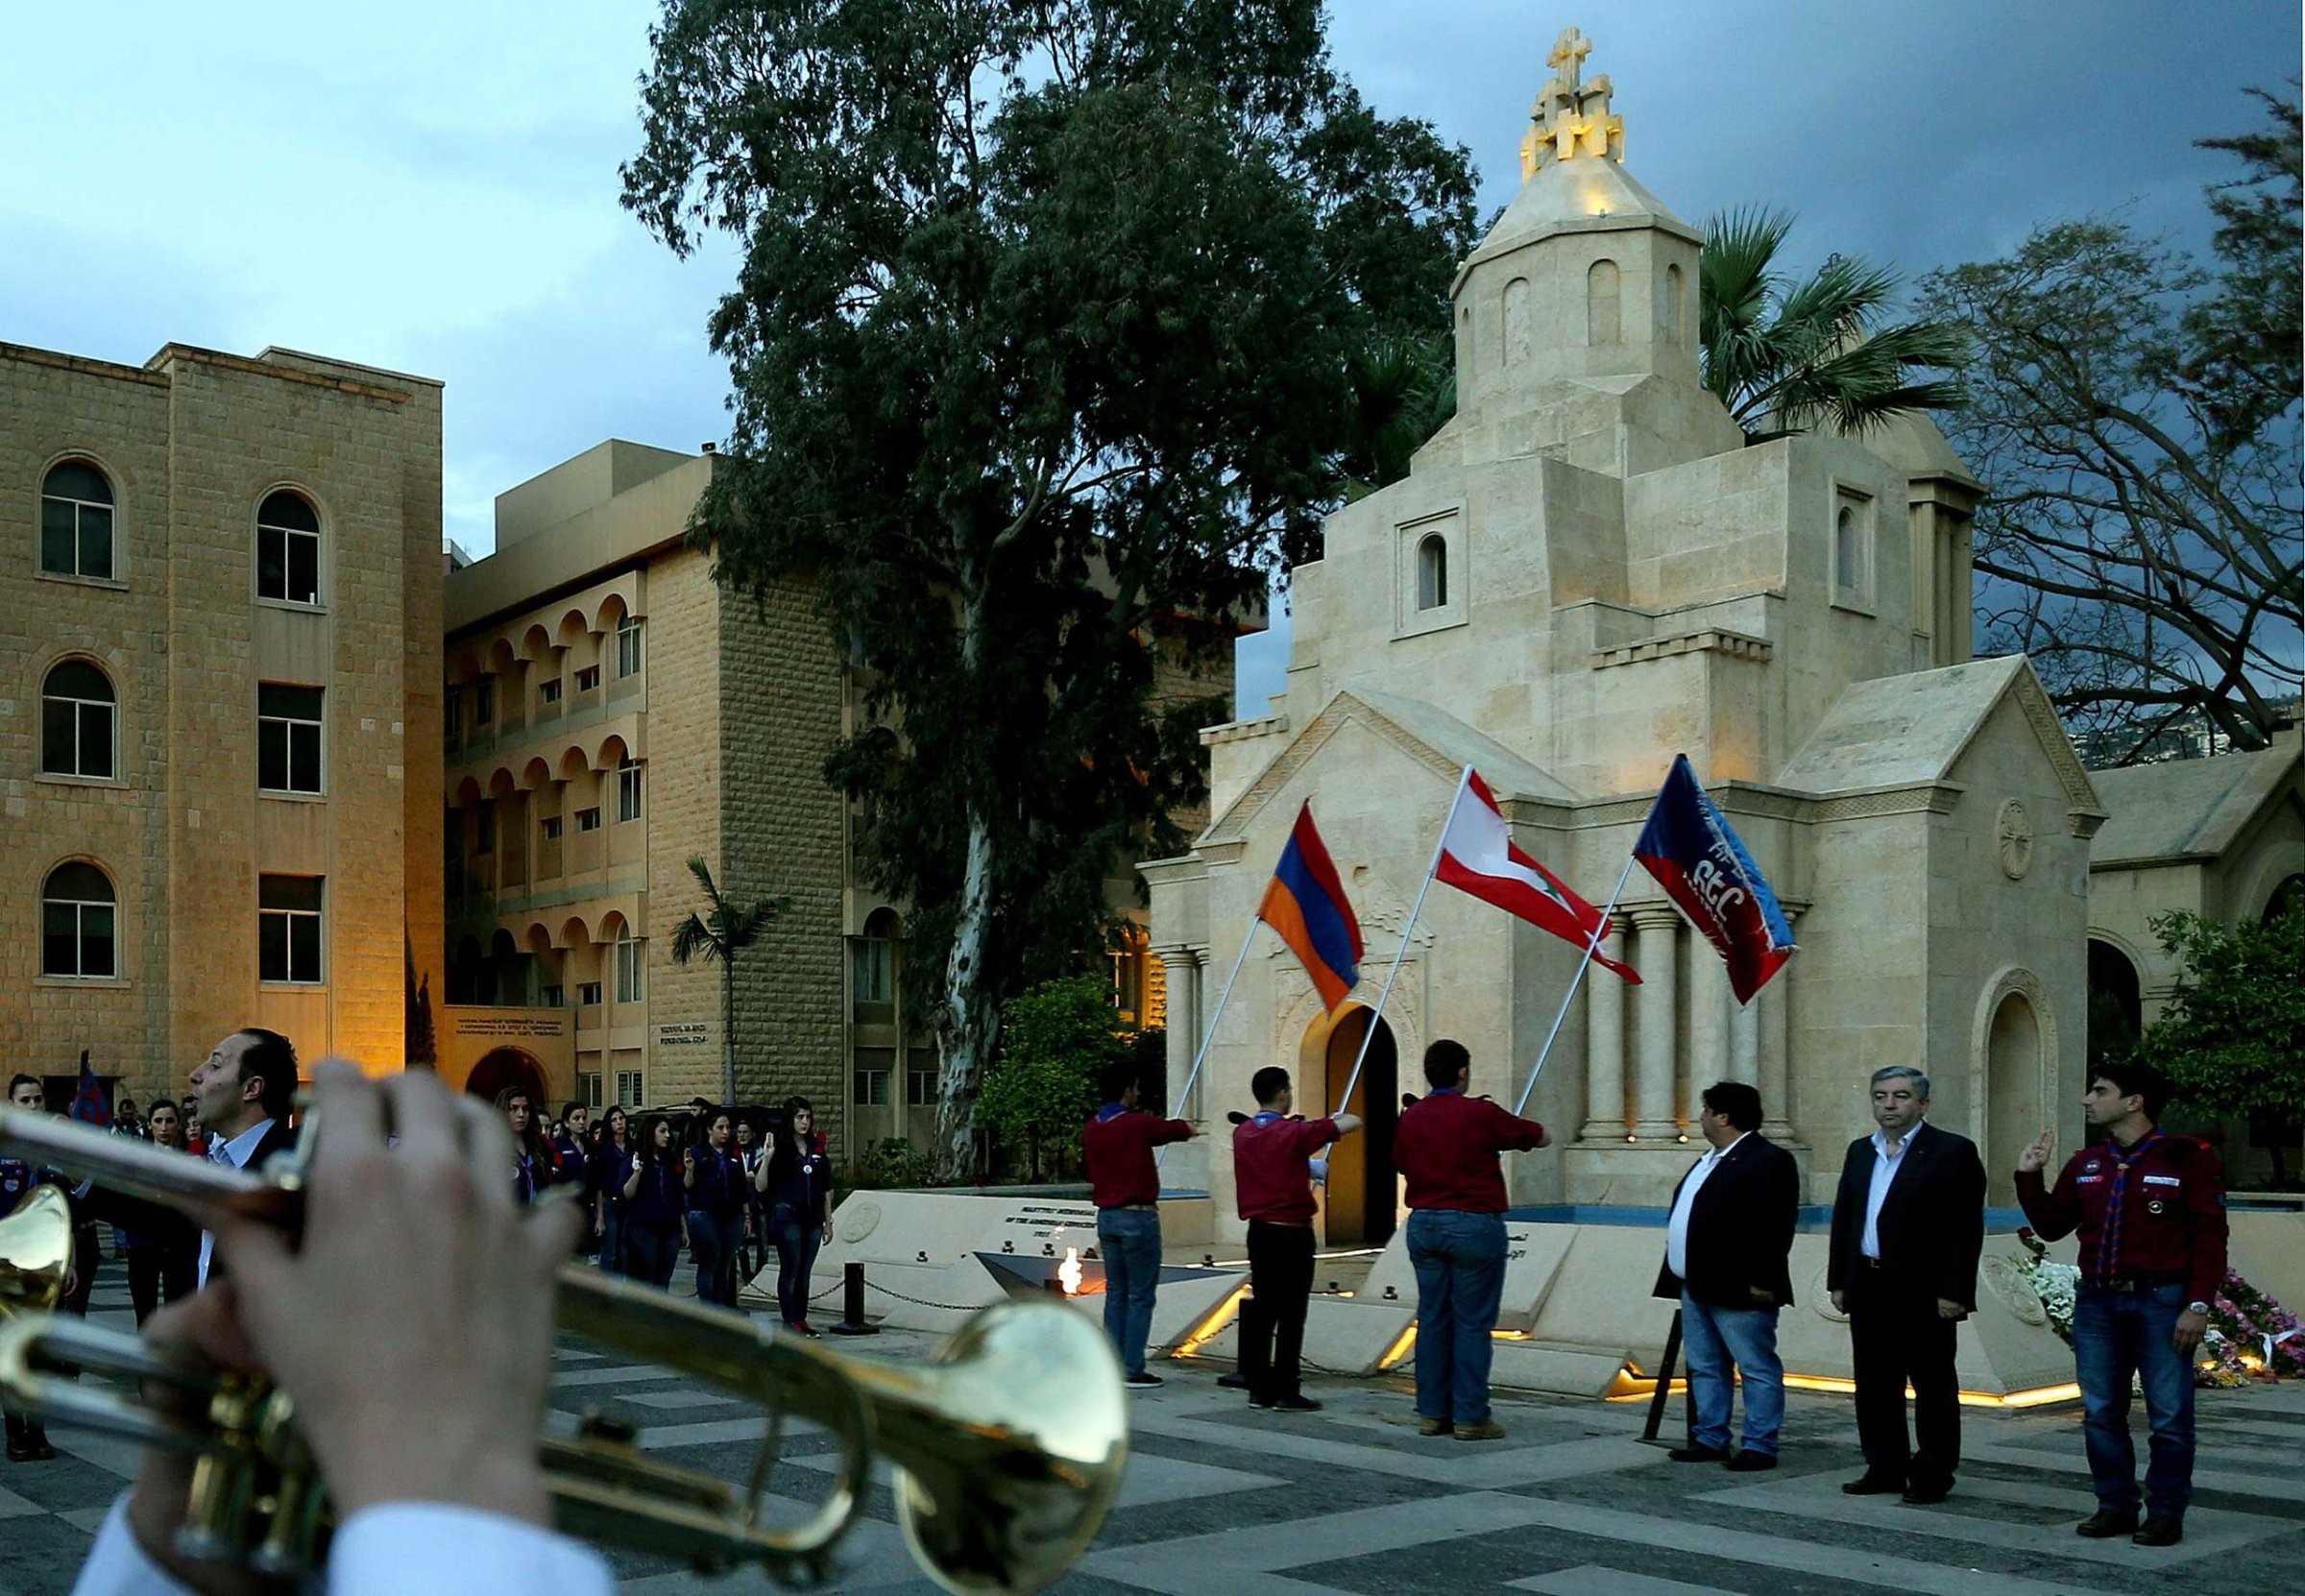 A ceremony at the Armenian Martyrs memorial north of Beirut on April 23, 2015.